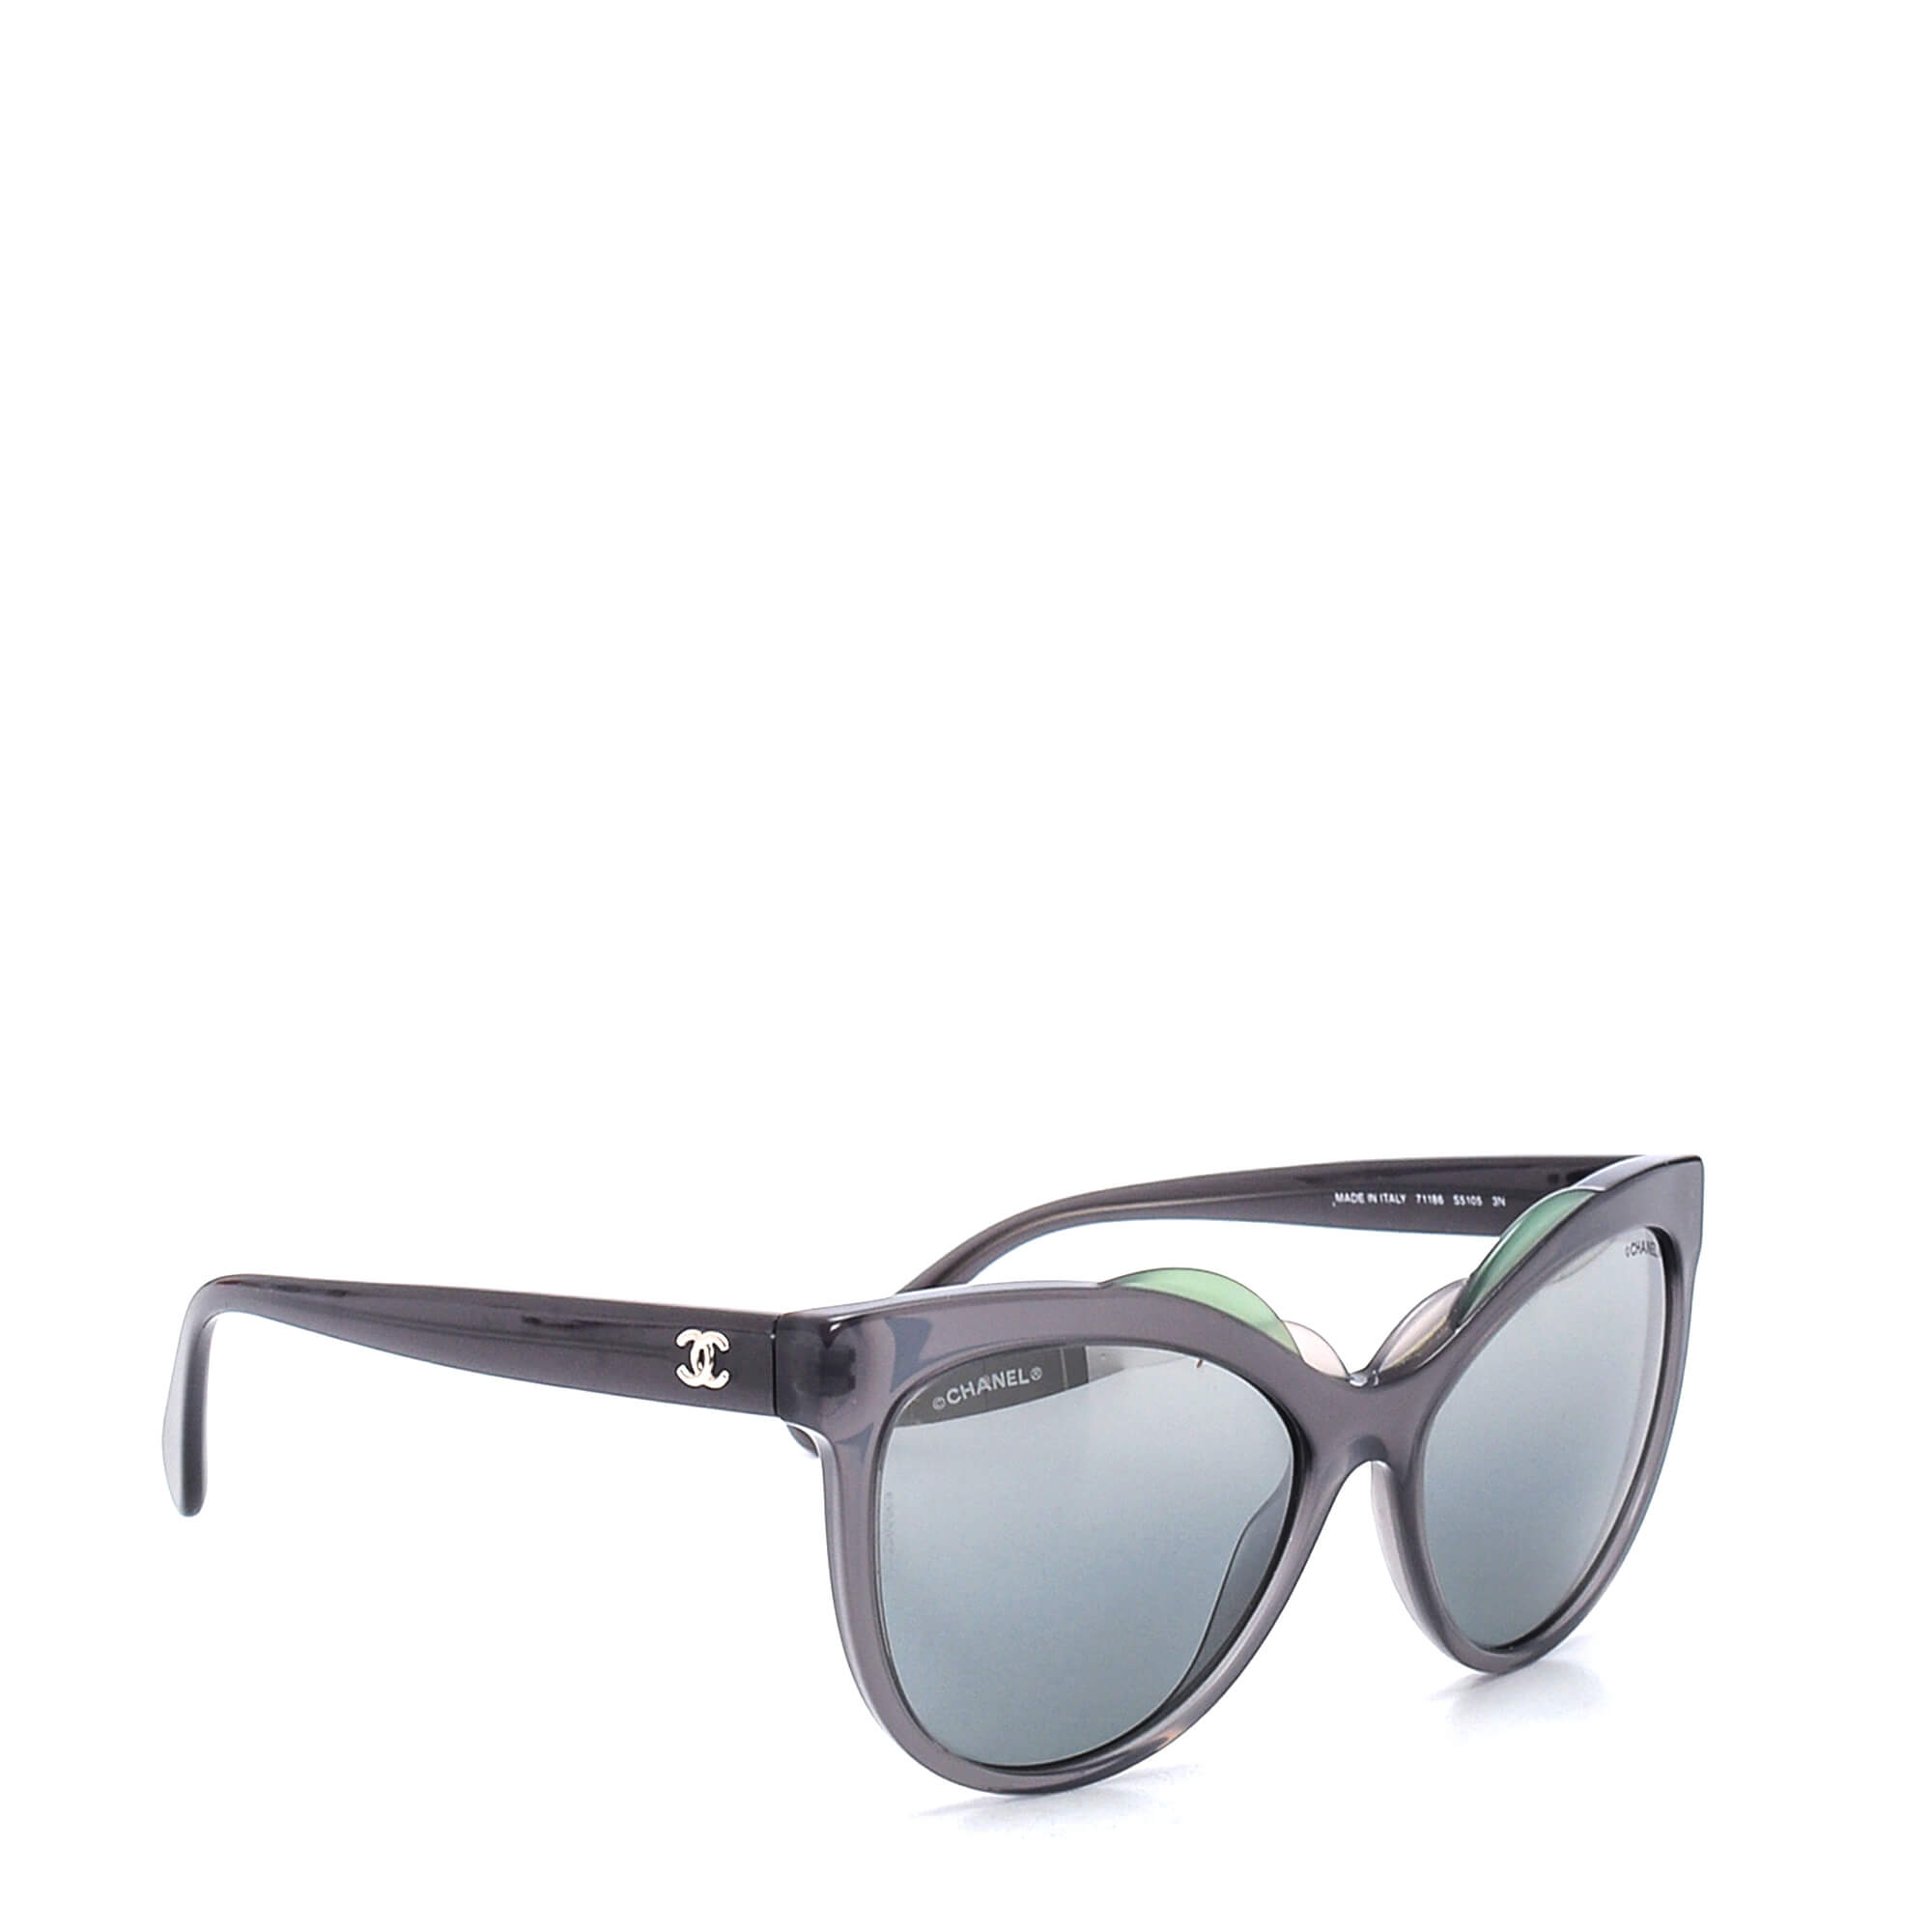 Chanel - Anthracite&Green Acetate Cat Eye Sunglasses